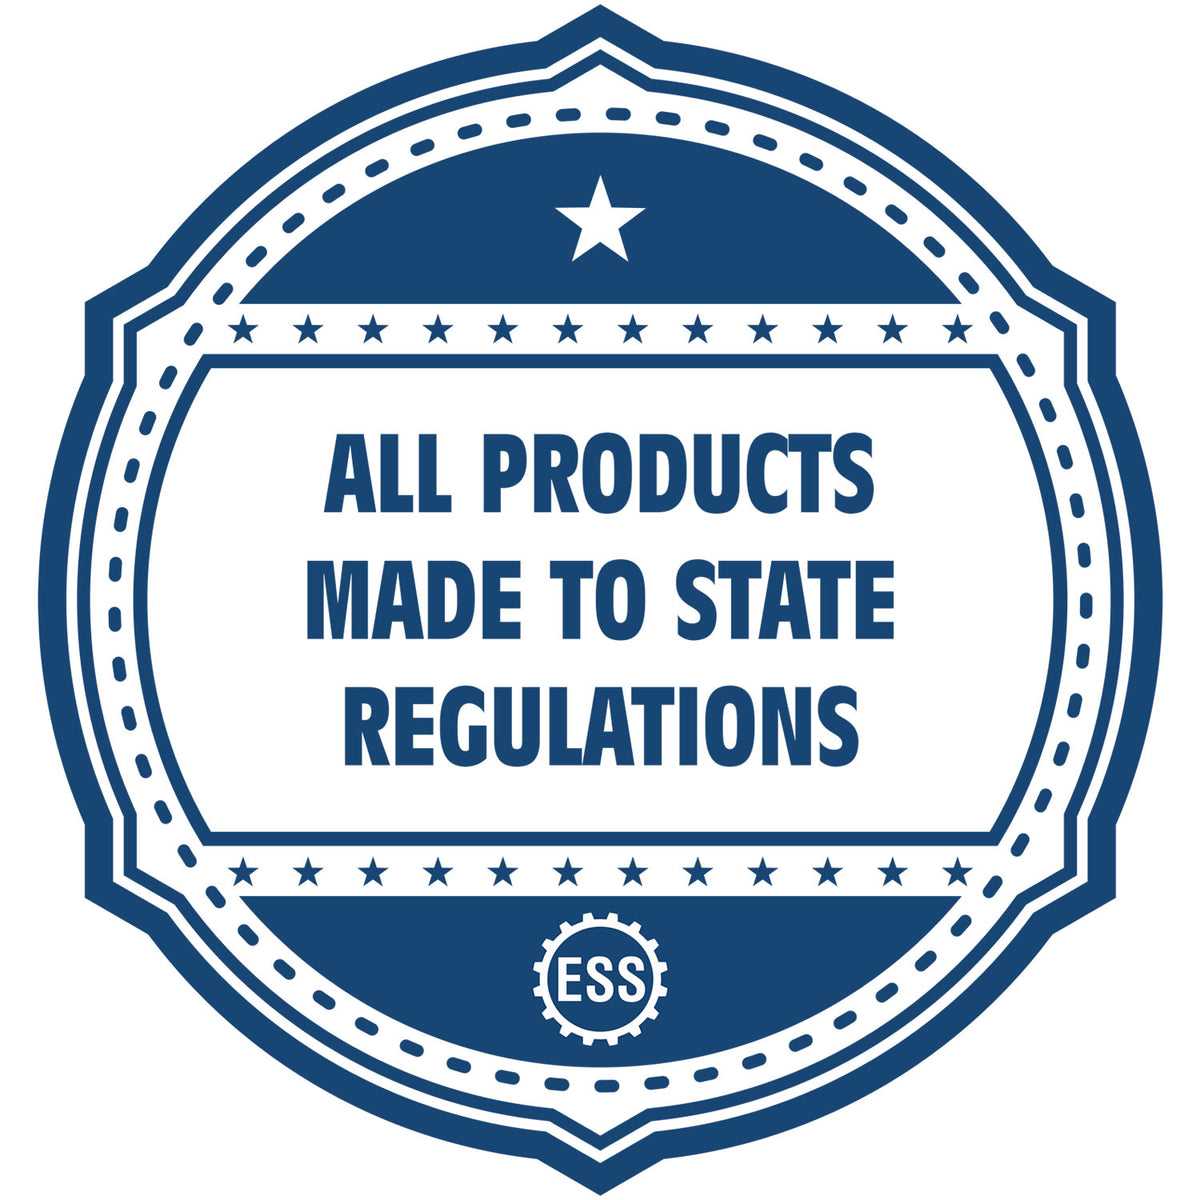 A blue icon or badge for the Hybrid Rhode Island Landscape Architect Seal showing that this product is made in compliance with state regulations.